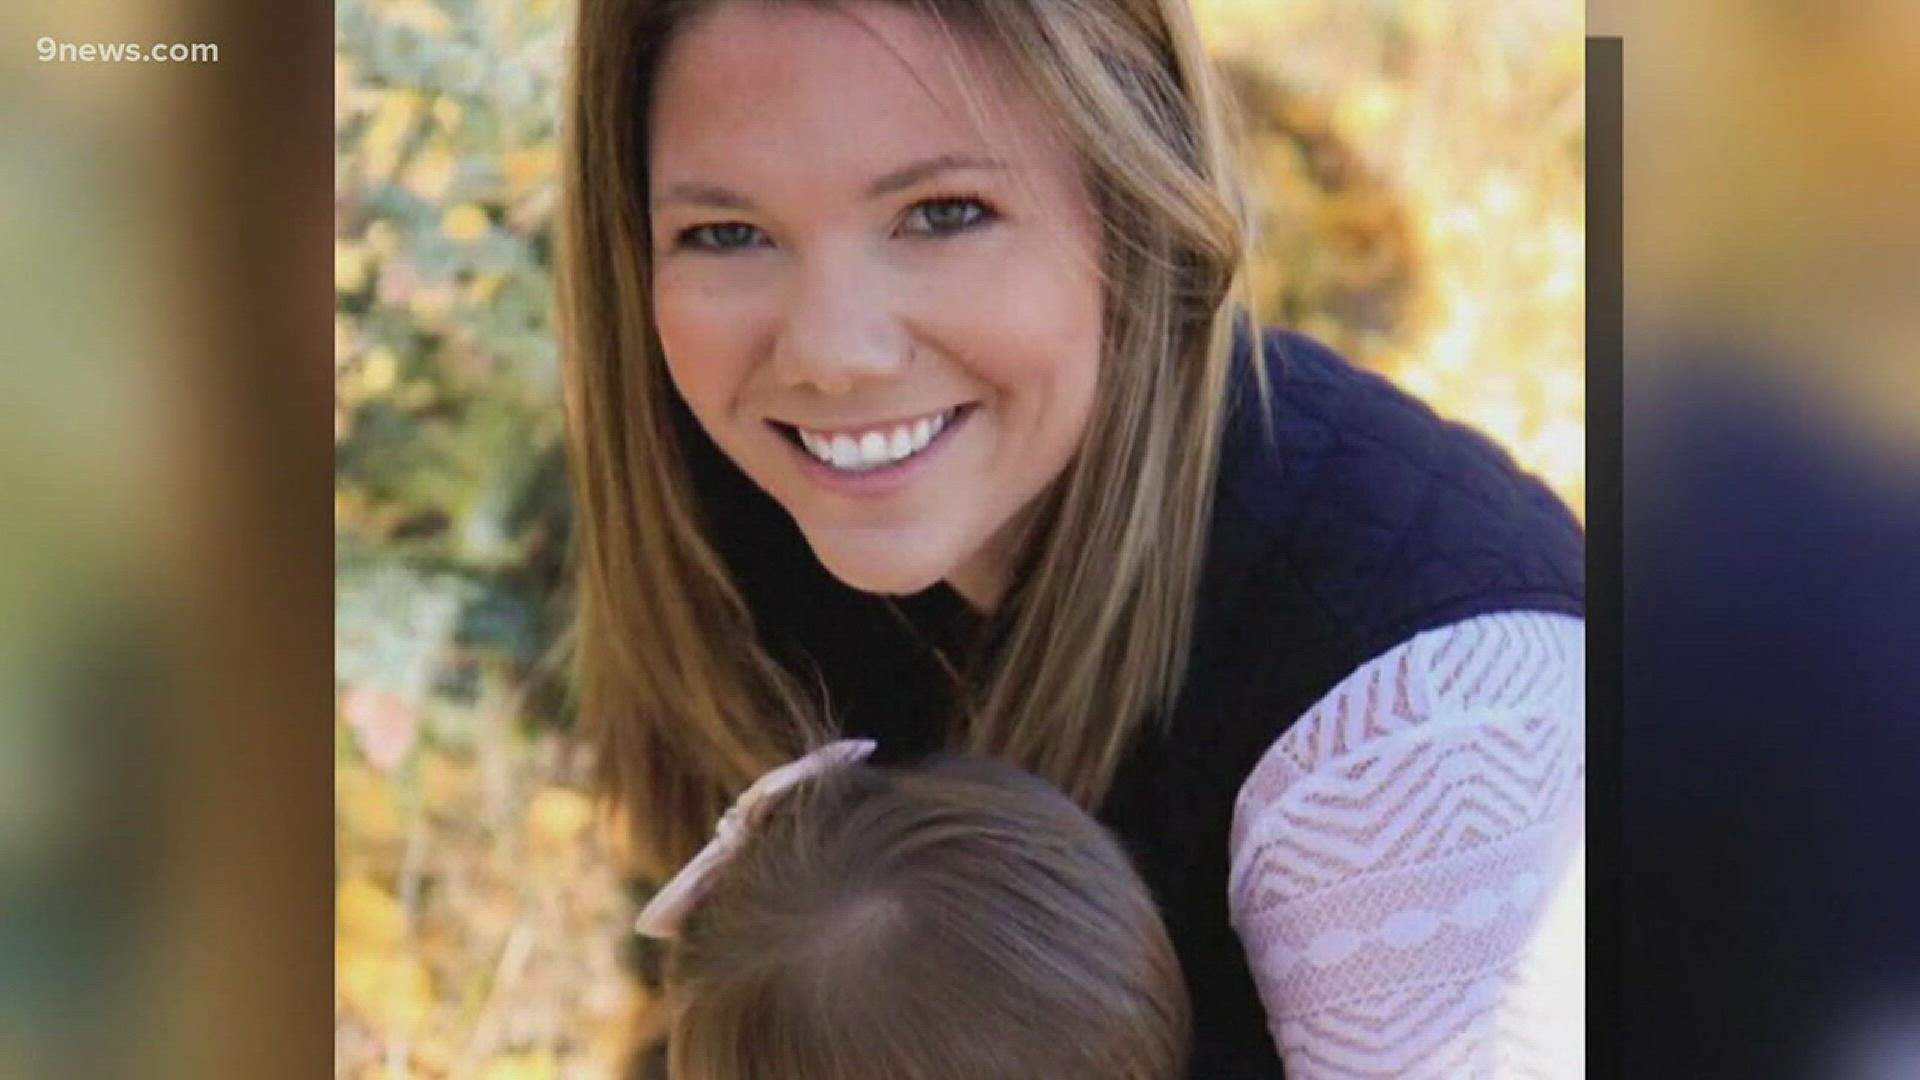 The parents of Kelsey Berreth filed a wrongful death lawsuit against her fiancé, Patrick Frazee, who has been charged in her death.